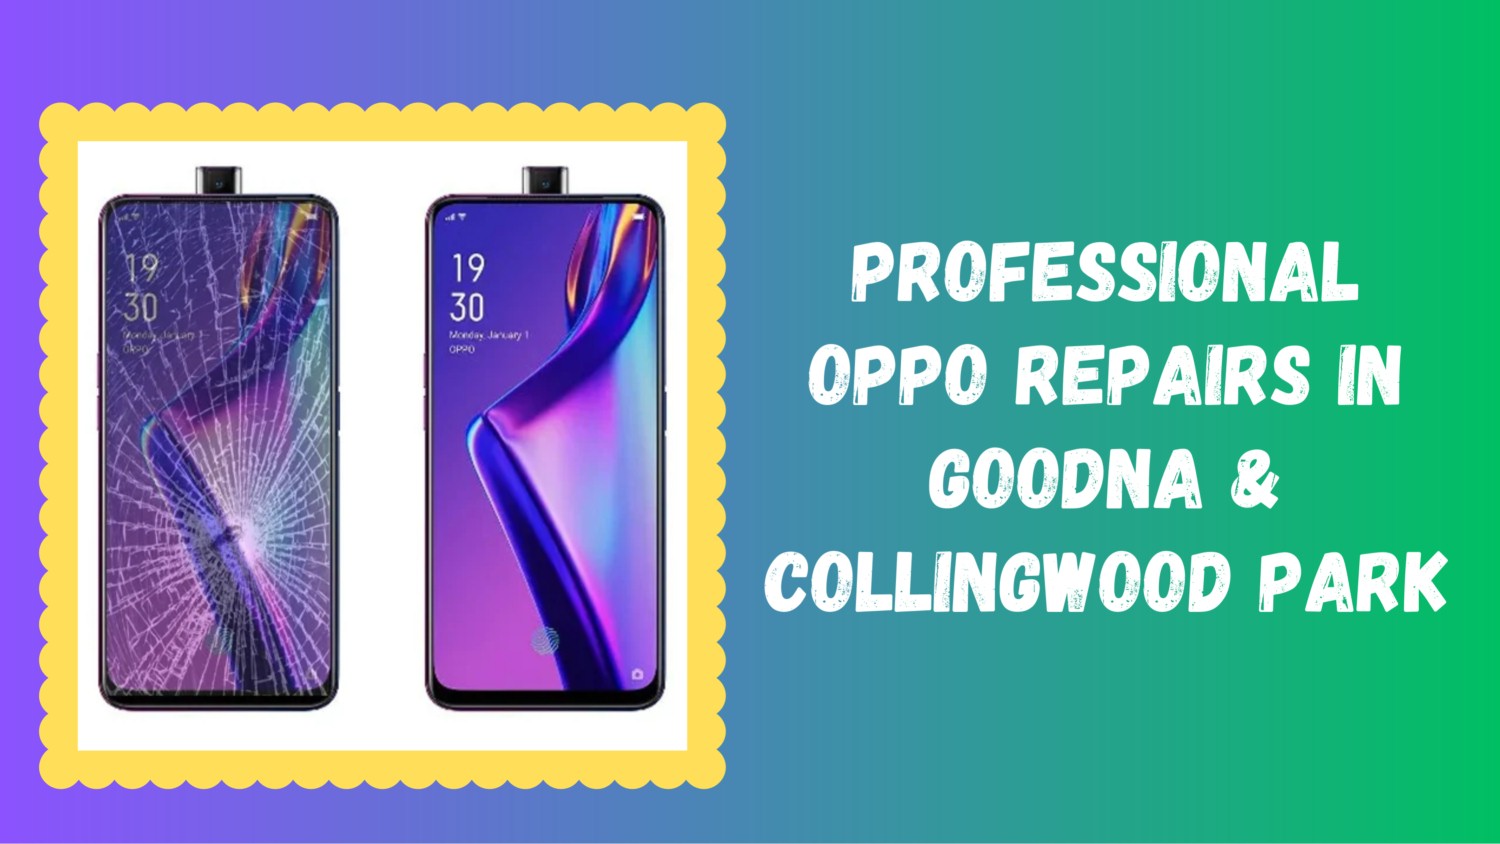 Professional Oppo Repairs in Goodna and Collingwood Park